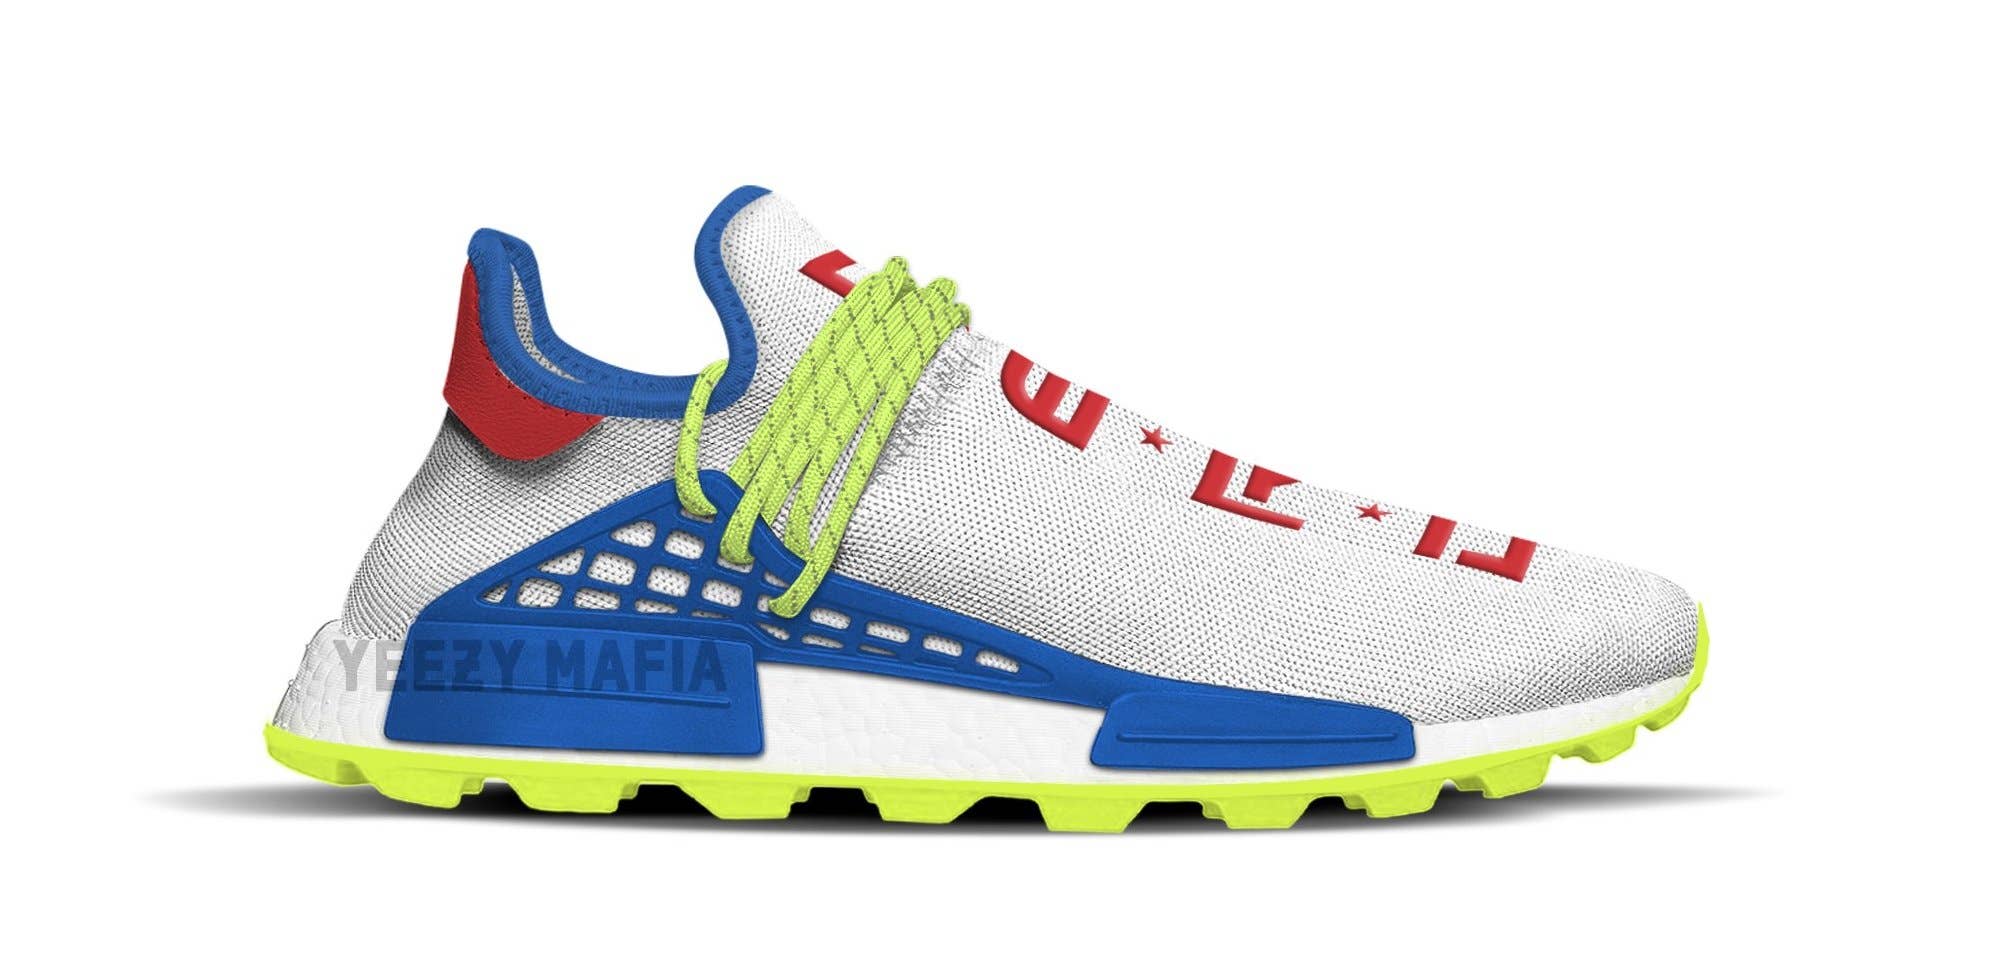 Another Pharrell x Adidas NMD Hu Is Dropping This Month